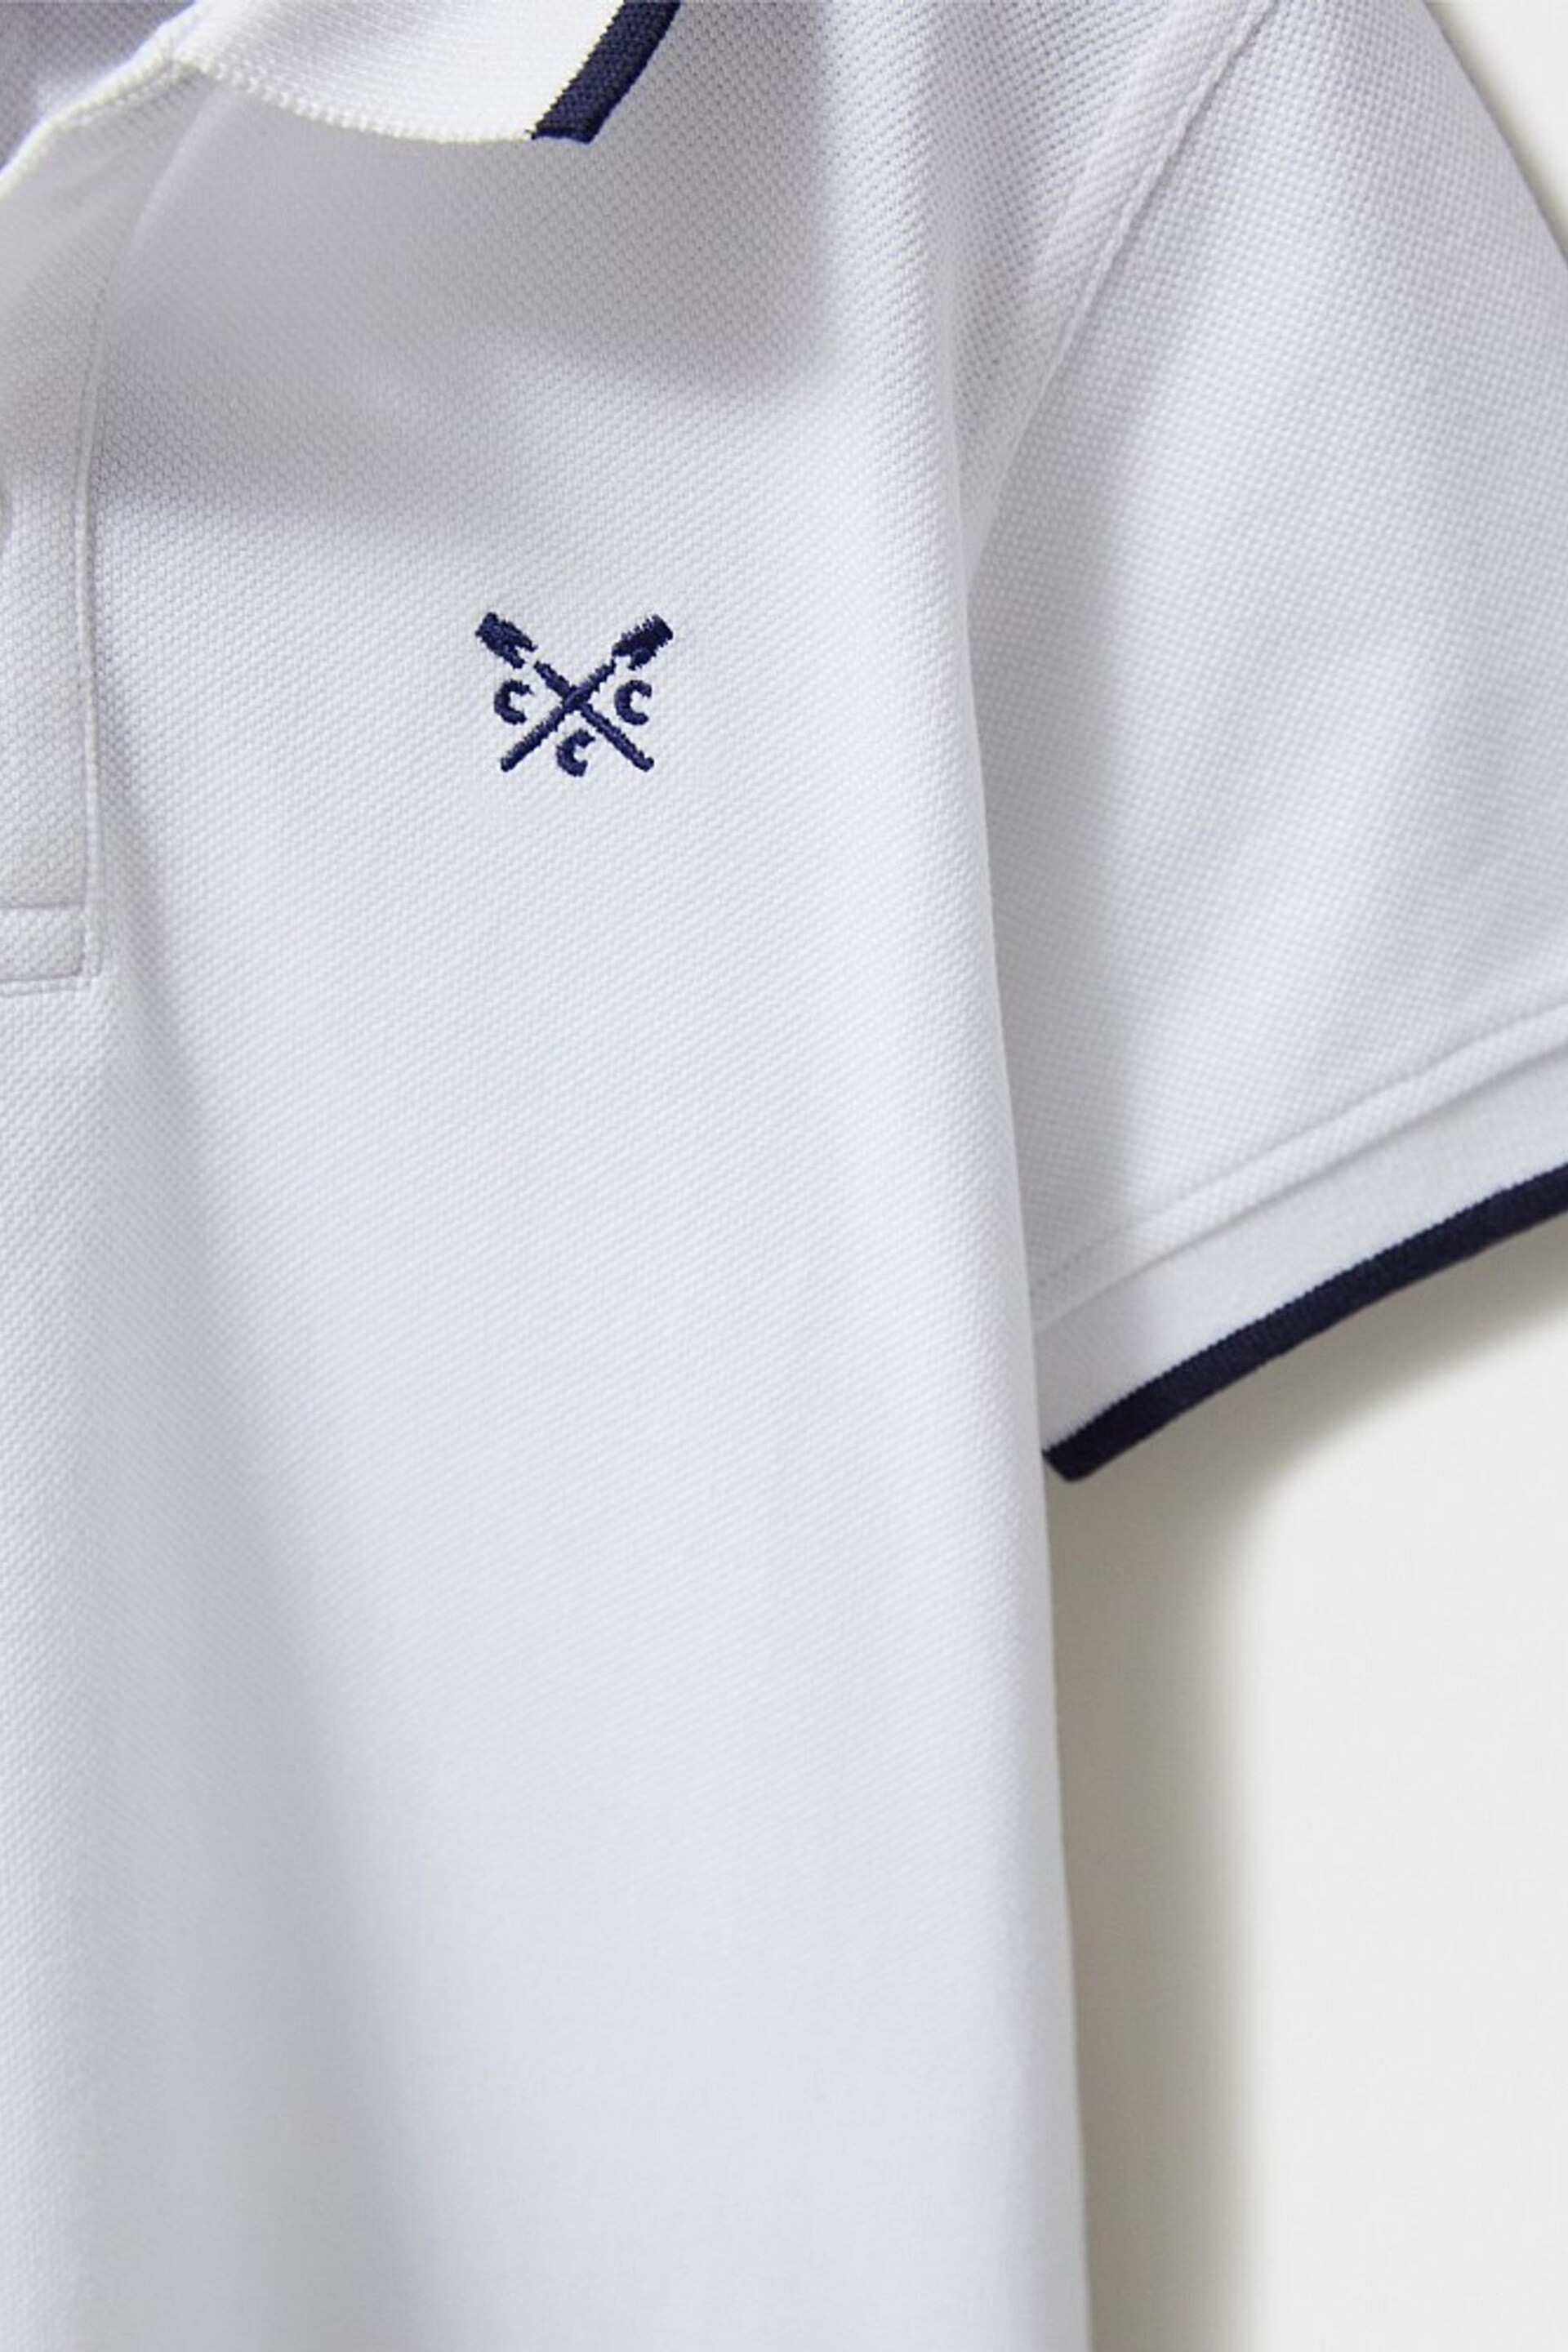 Crew Clothing Tipped Pique Short Sleeve Polo Shirt - Image 5 of 5